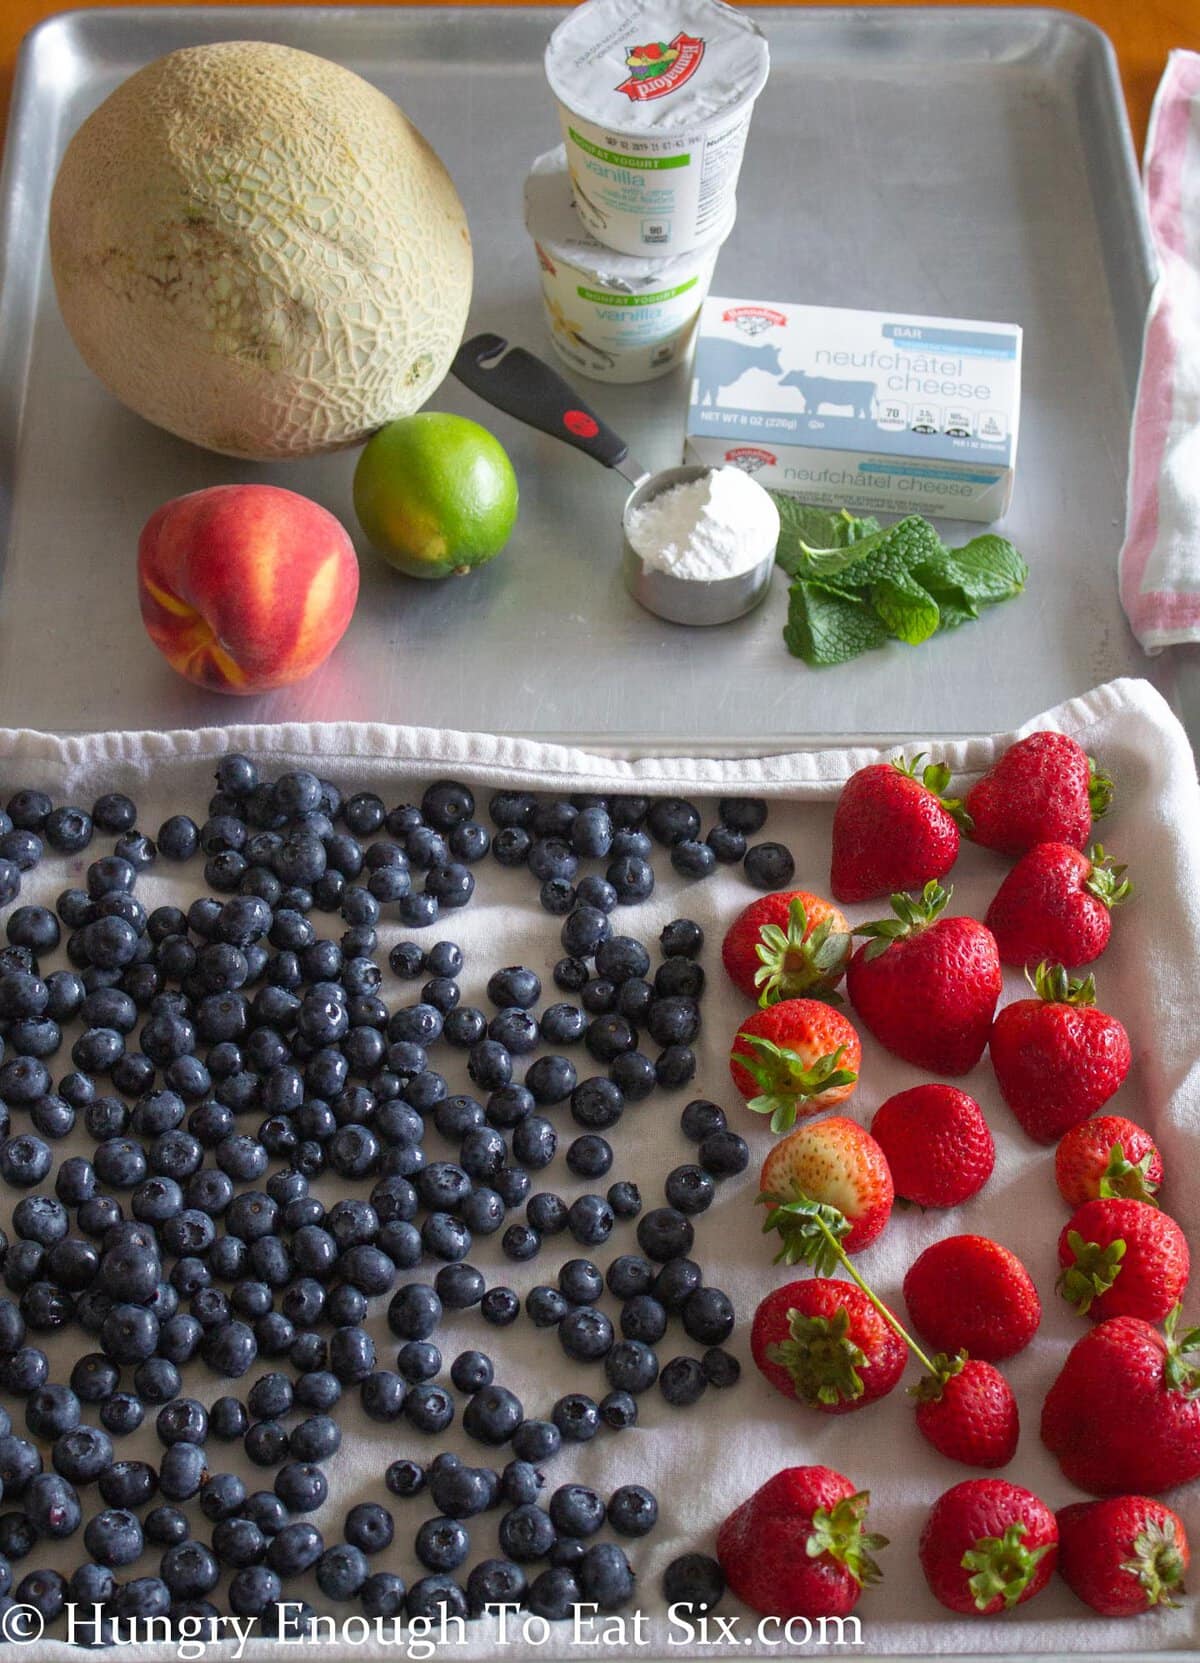 Blueberries and strawberries spread on a kitchen towel.